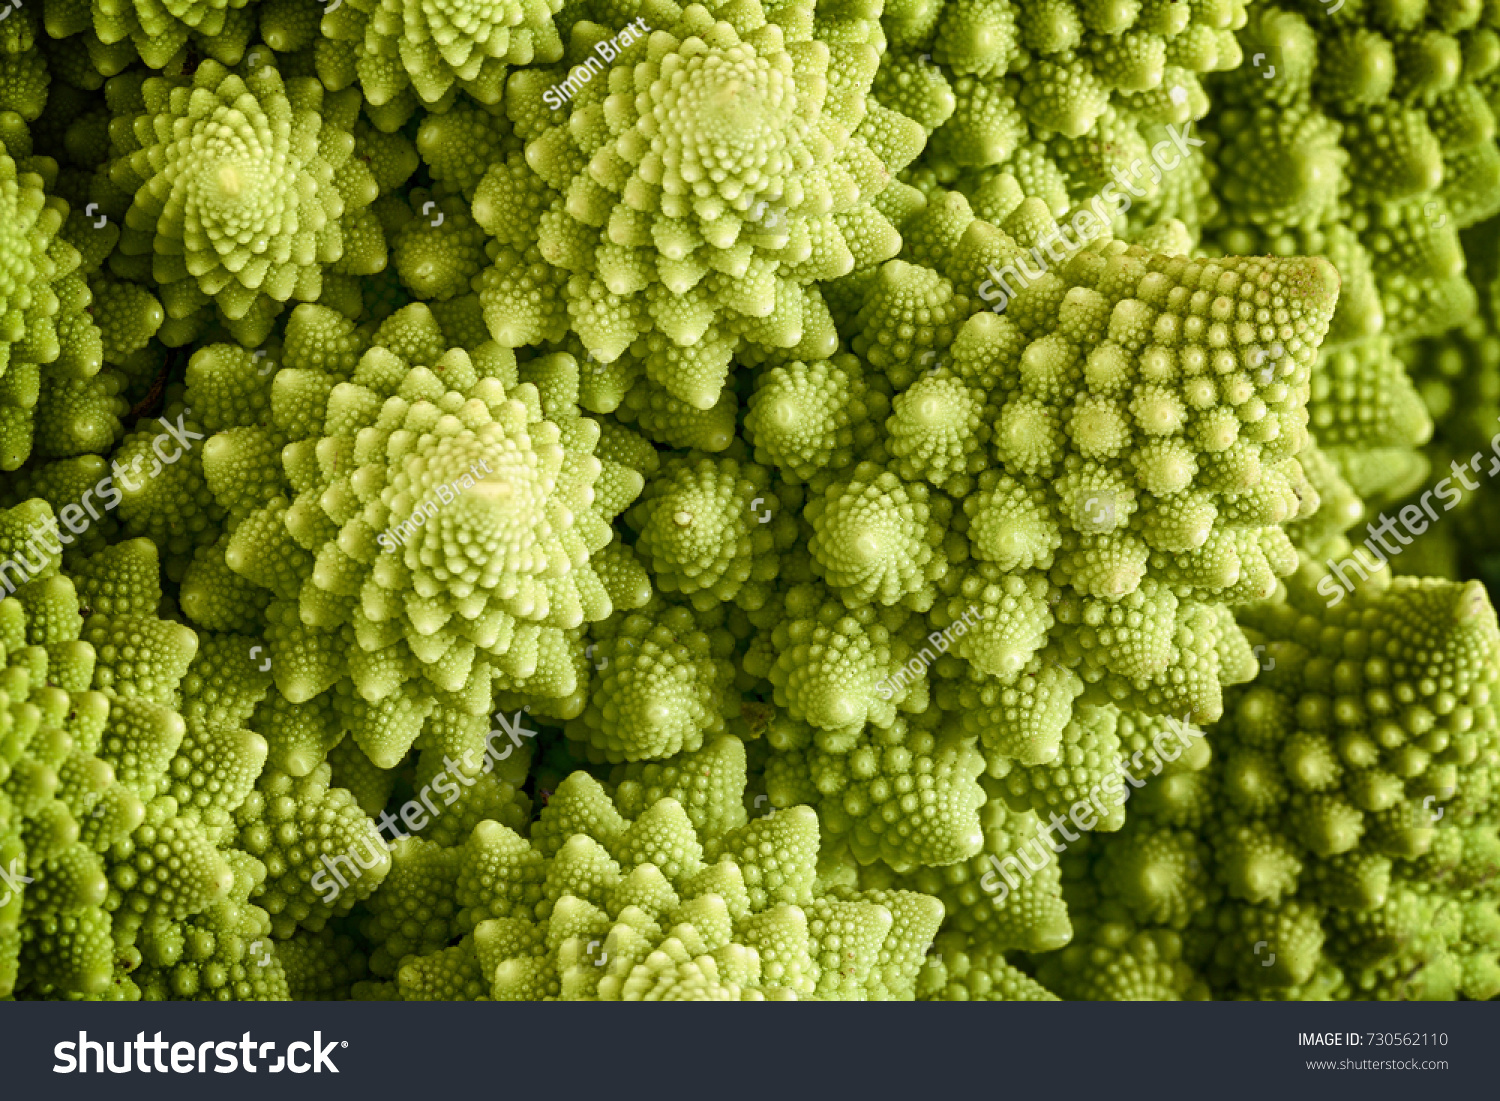 Romanesco broccoli vegetable represents a natural fractal pattern and is rich in vitimans. First documented in Italy originating from the Brassica oleracea family. Close up view of the fractal spirals #730562110